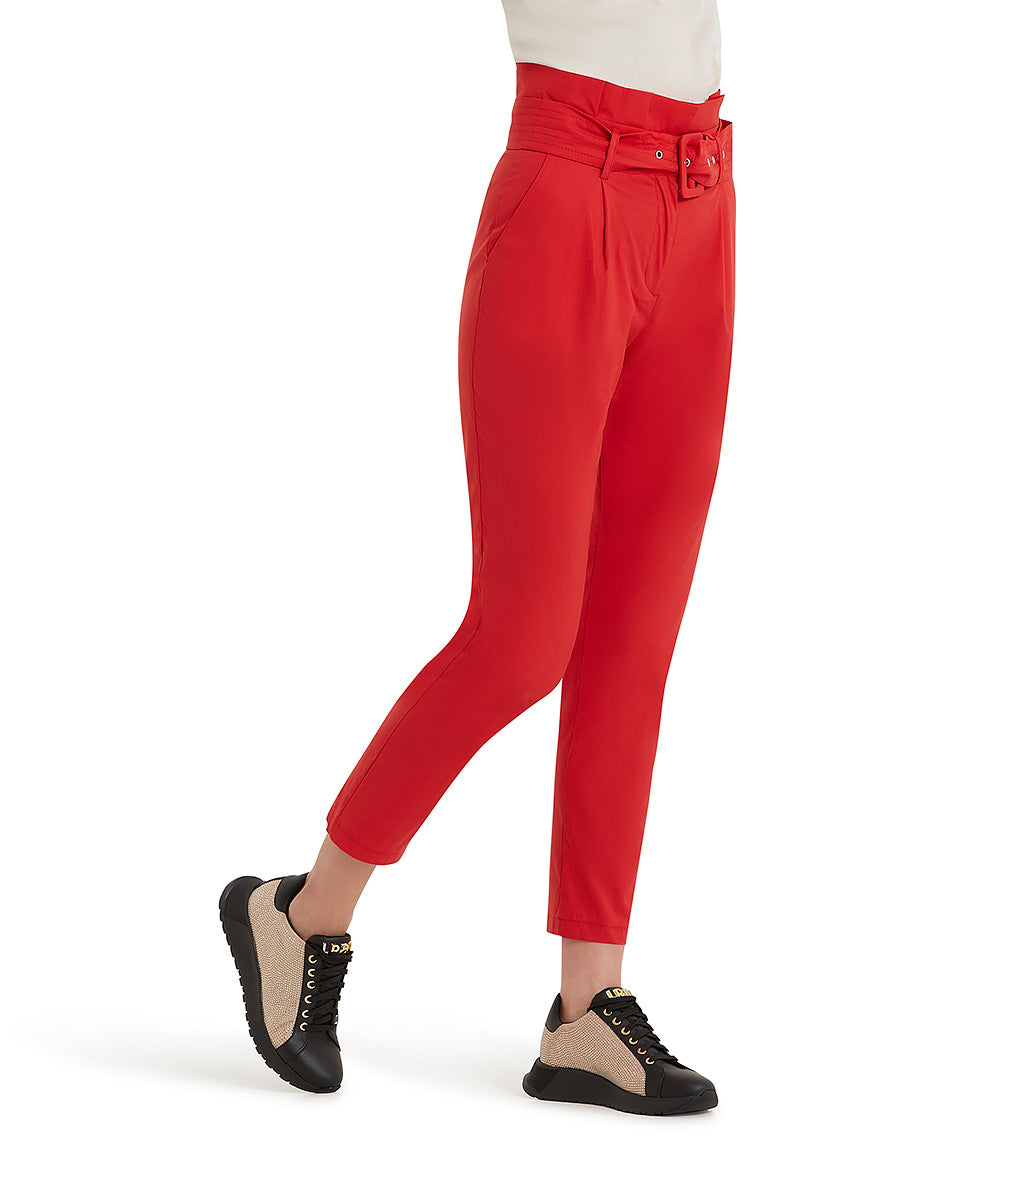 Red palazzo trousers